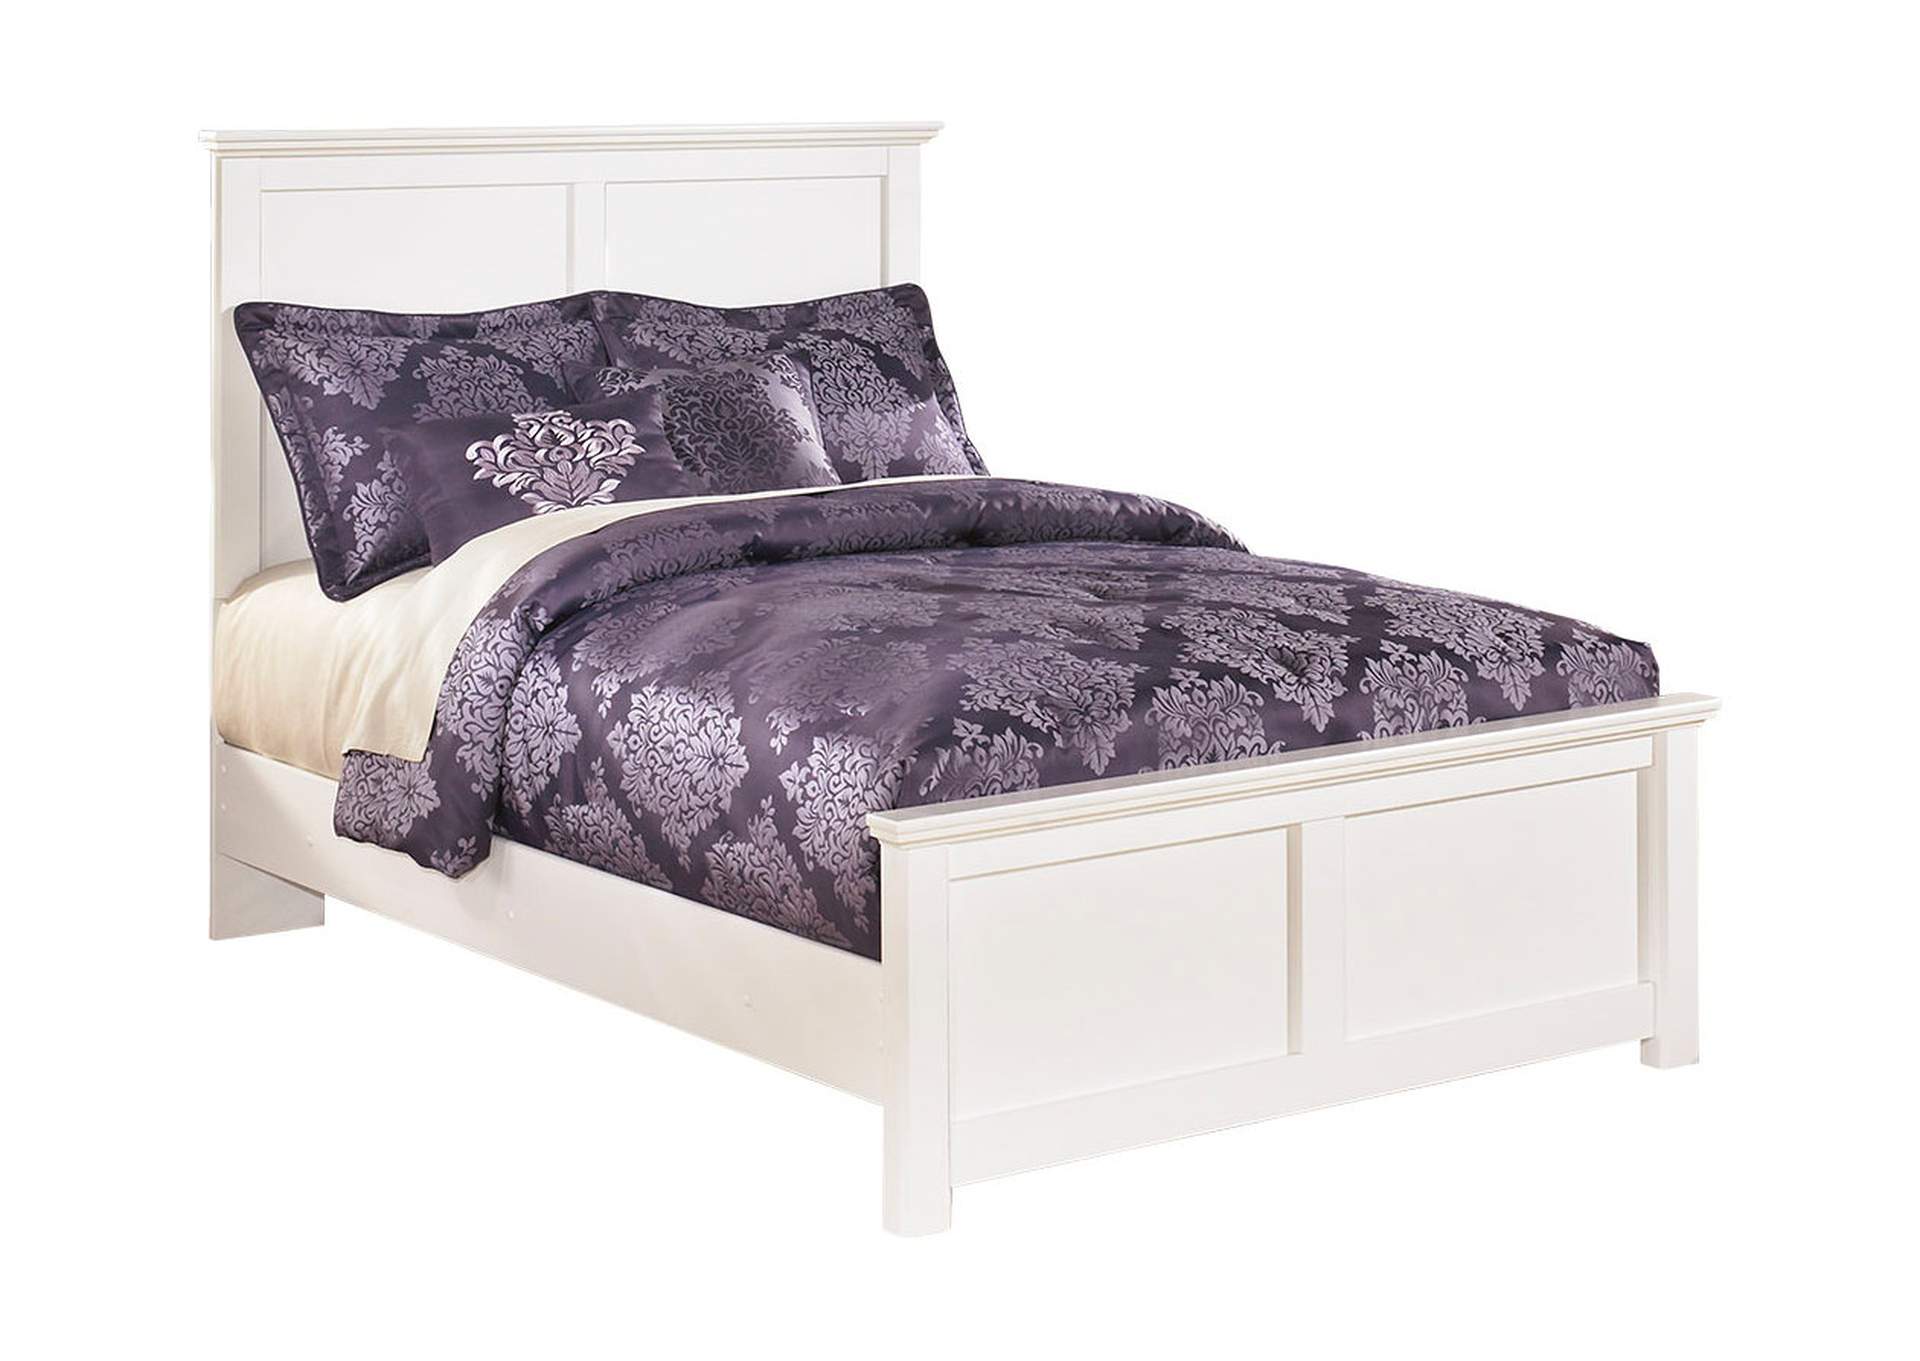 Bostwick Shoals Full Panel Bed, Dresser, Mirror and Nightstand,Signature Design By Ashley